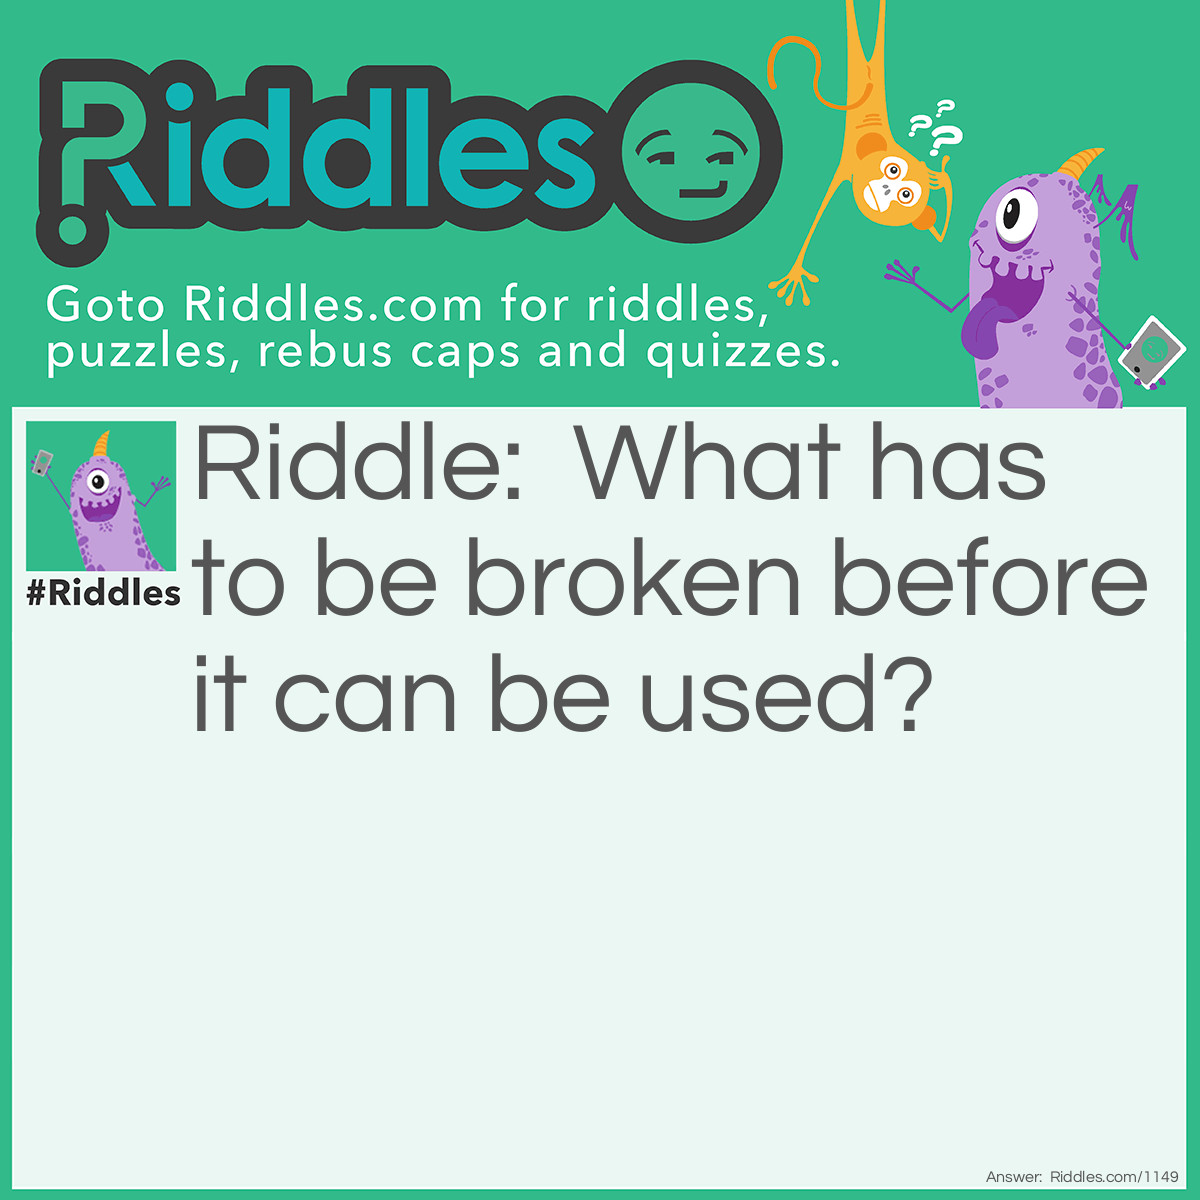 Riddle: What has to be broken before it can be used? Answer: An egg.